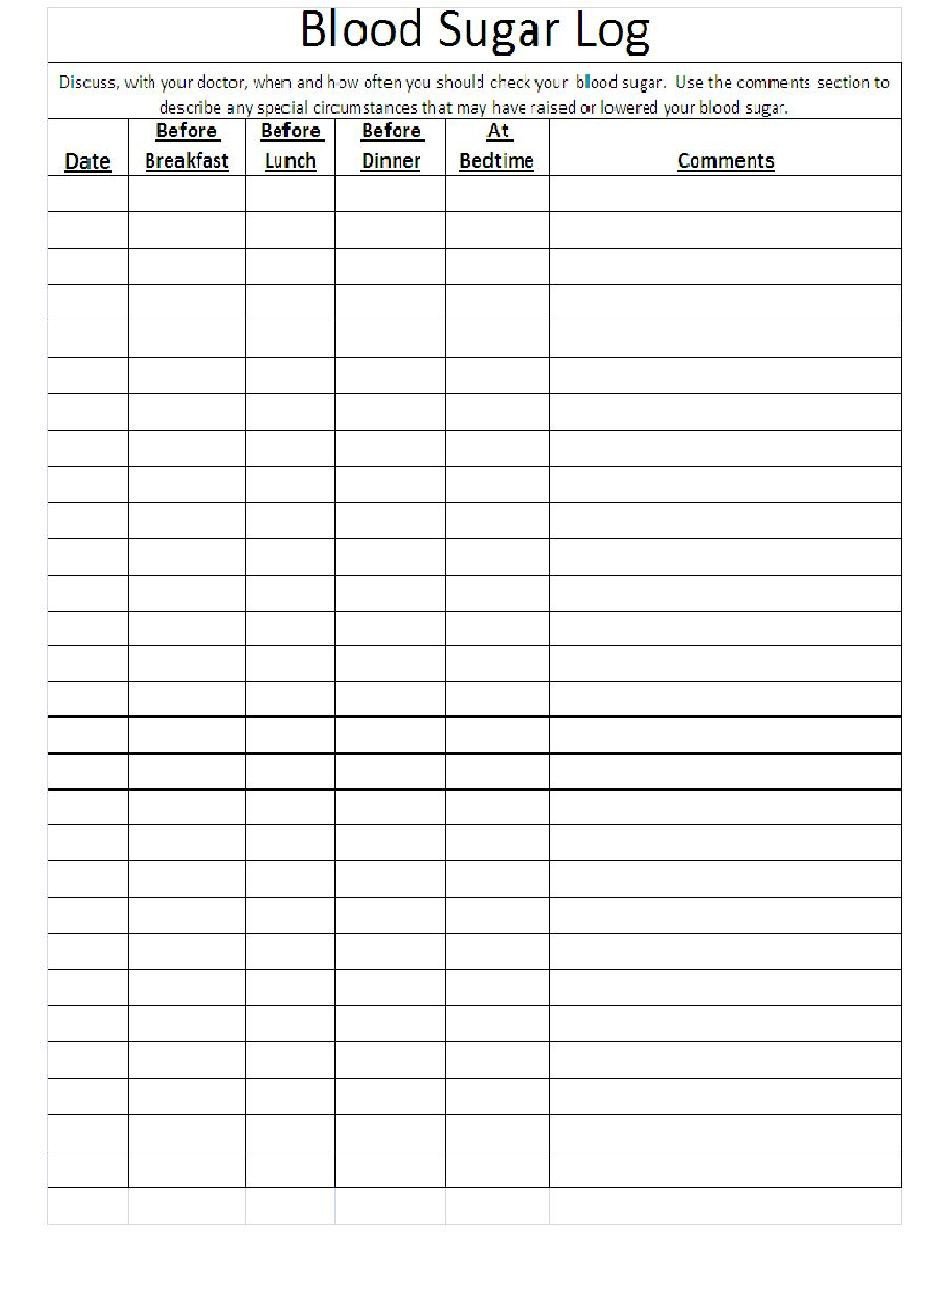 Blood Sugar Log Template for Patients – People S Health Centers